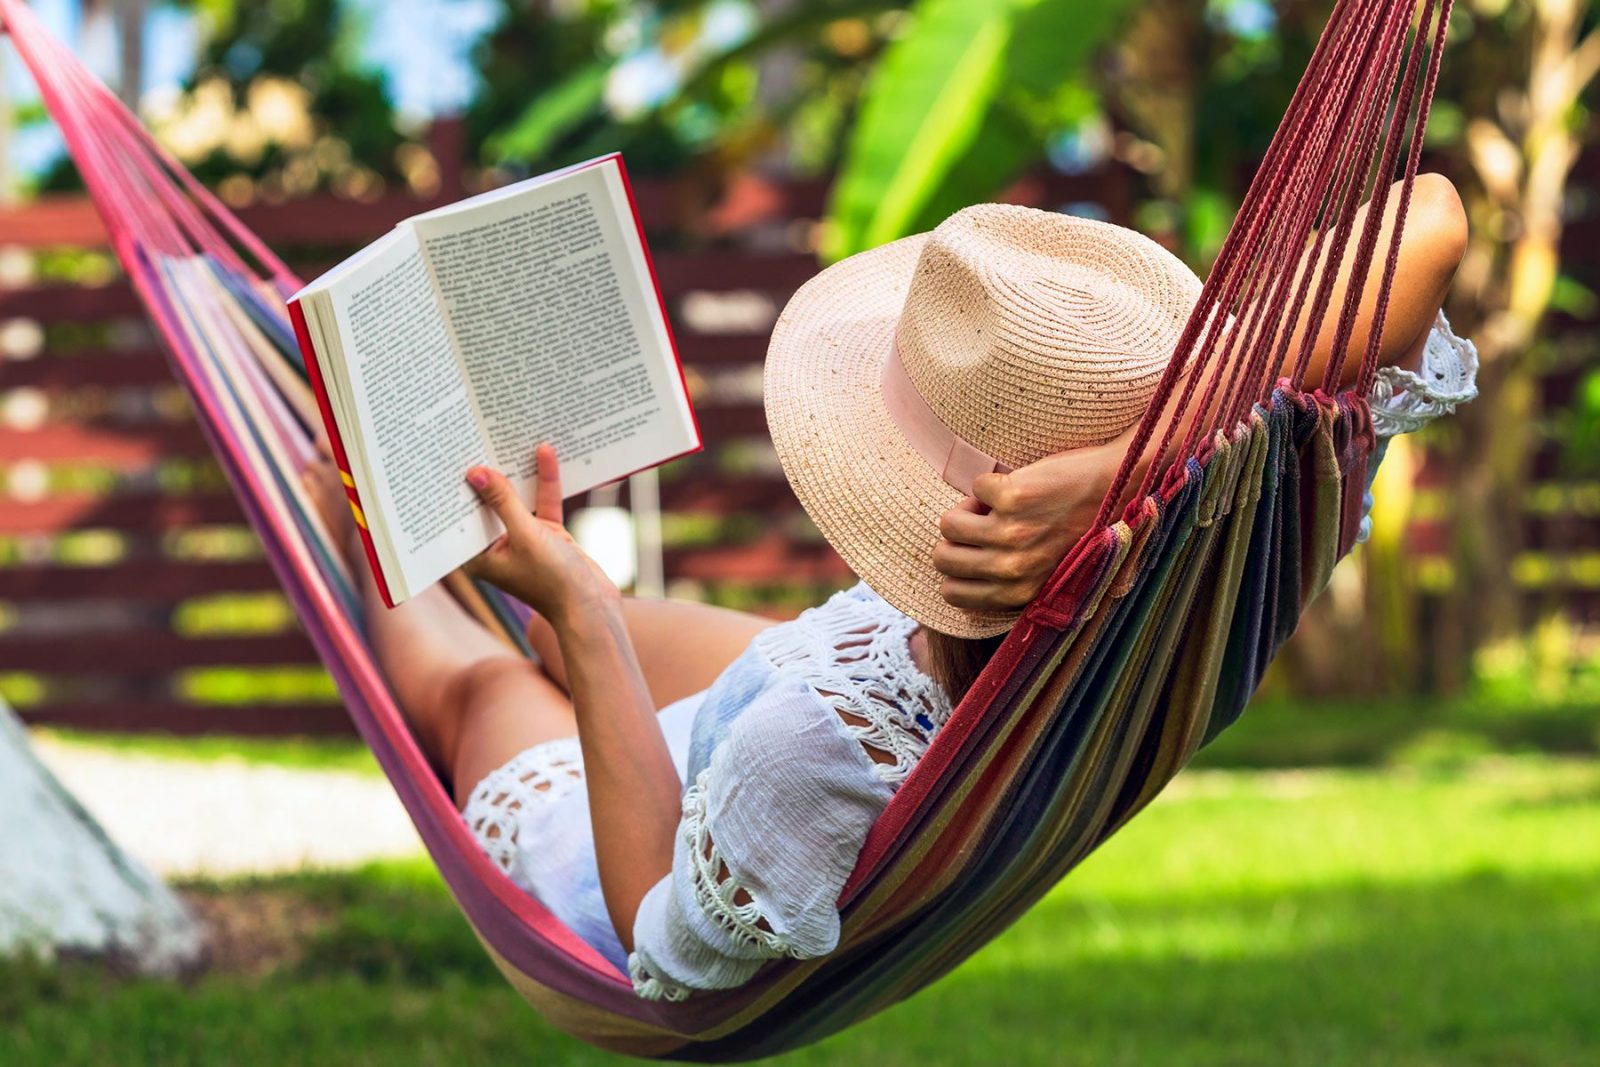 Books Or Movies Relaxing weekend reading book hammock